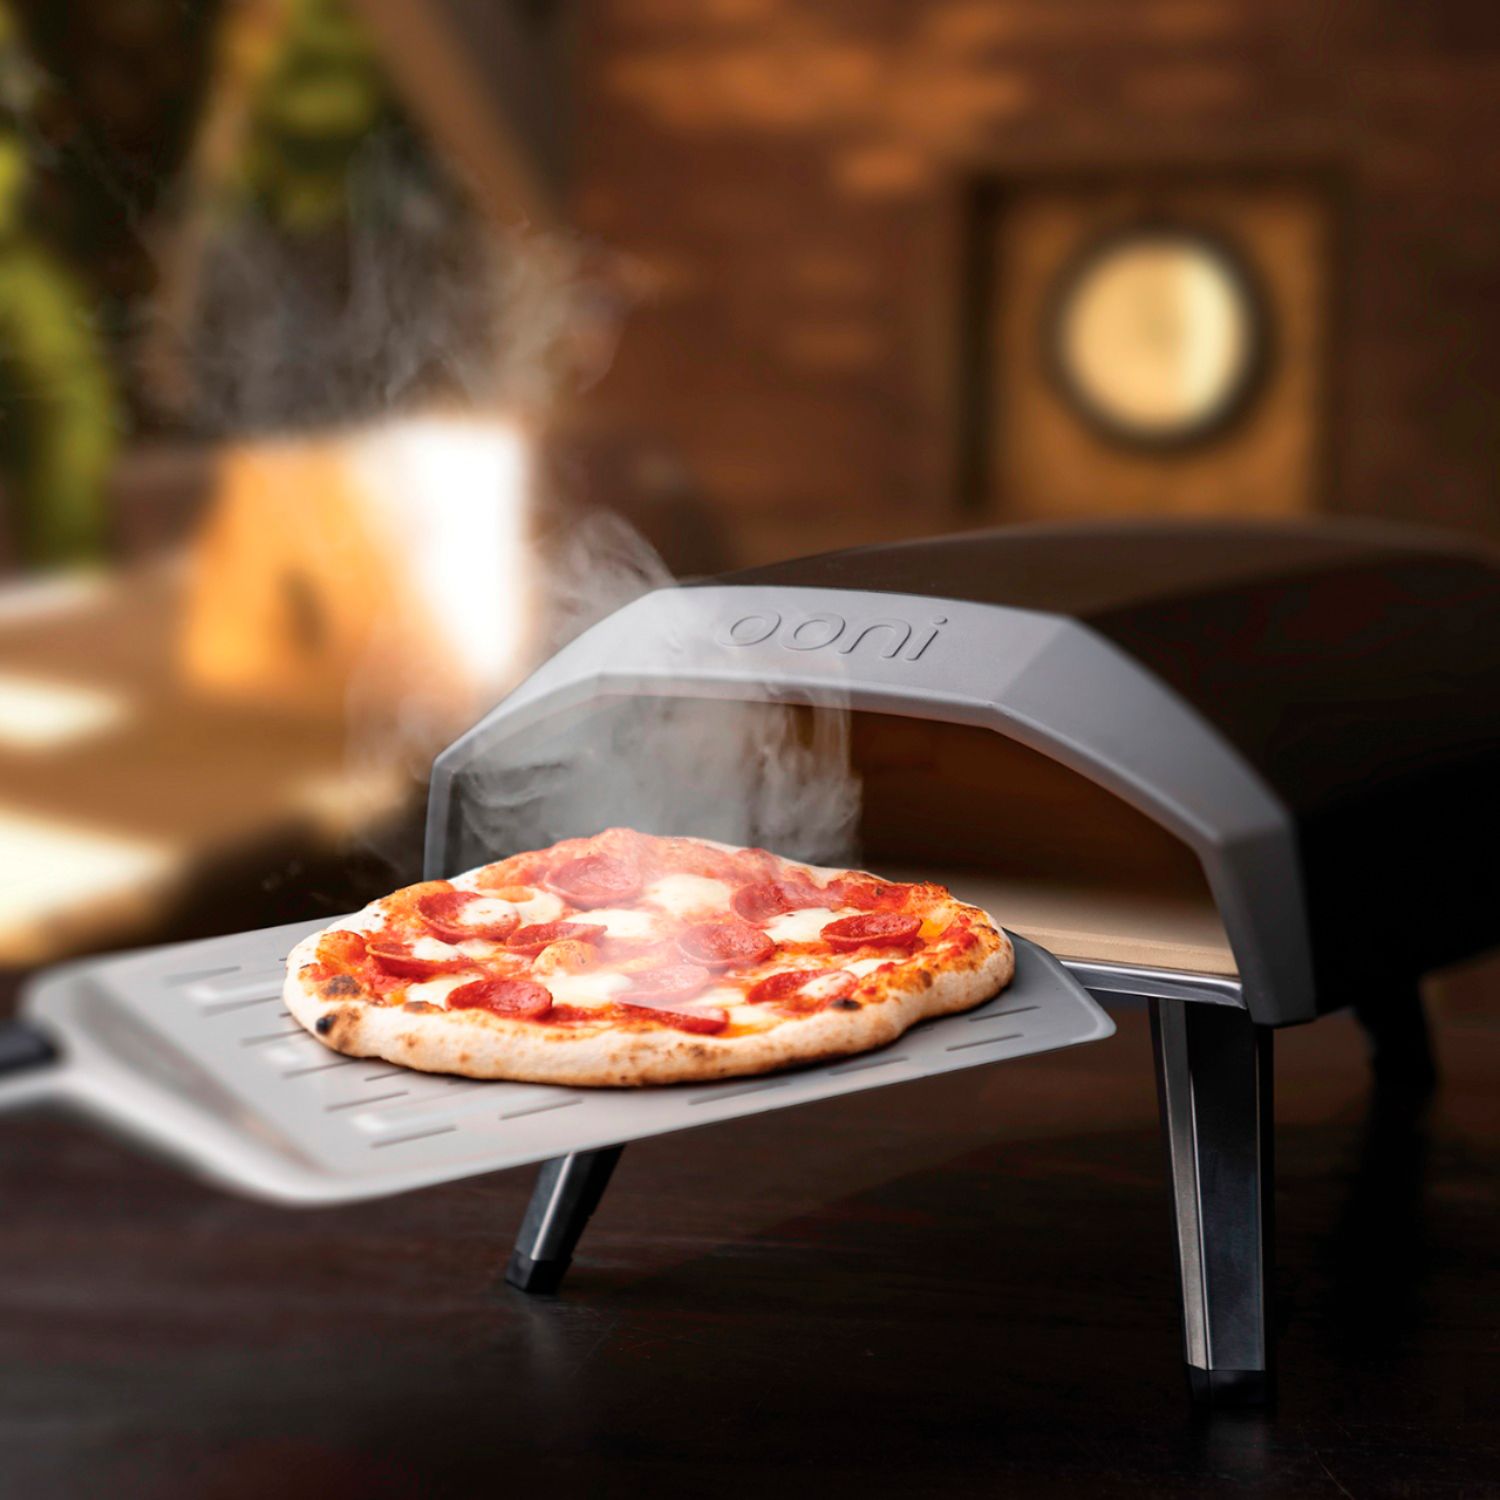 Ooni Pizza oven accessories explained 